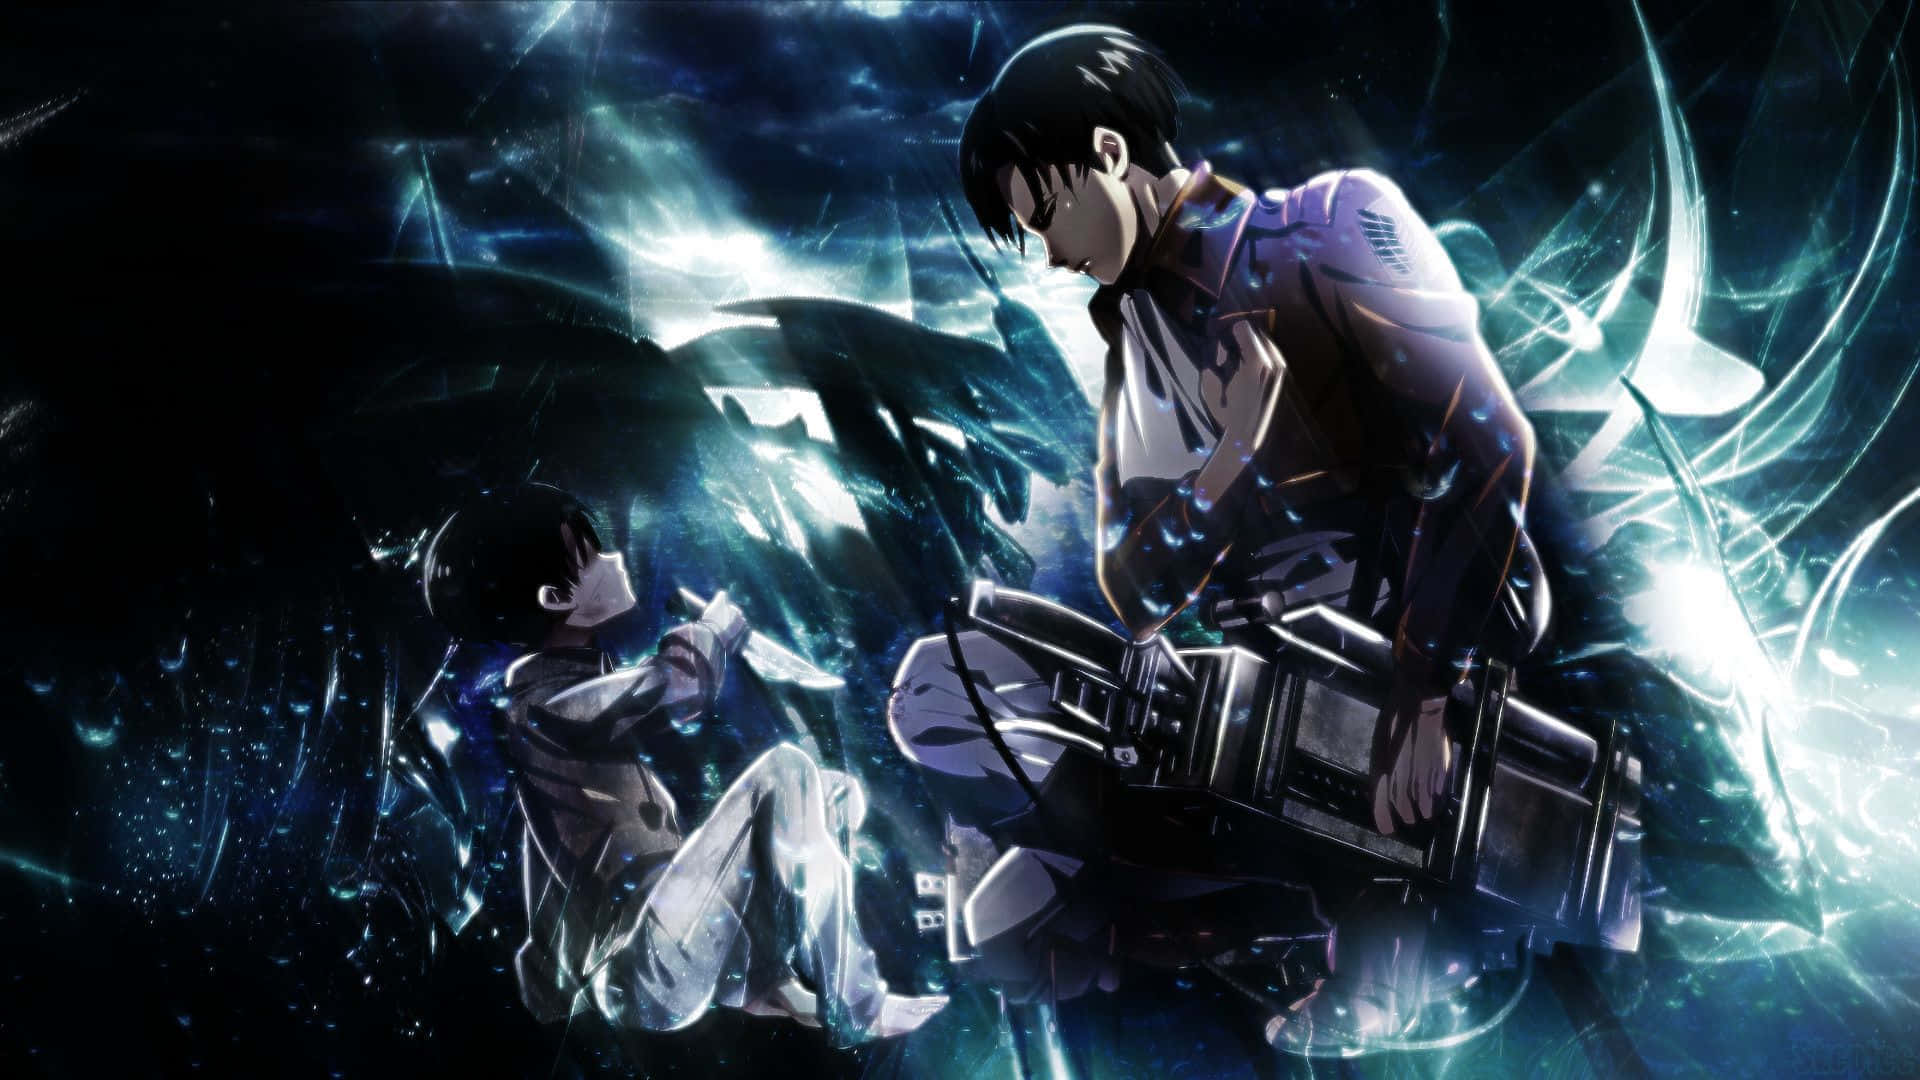 "Levi Ackerman - The Strongest of the Survey Corps" Wallpaper